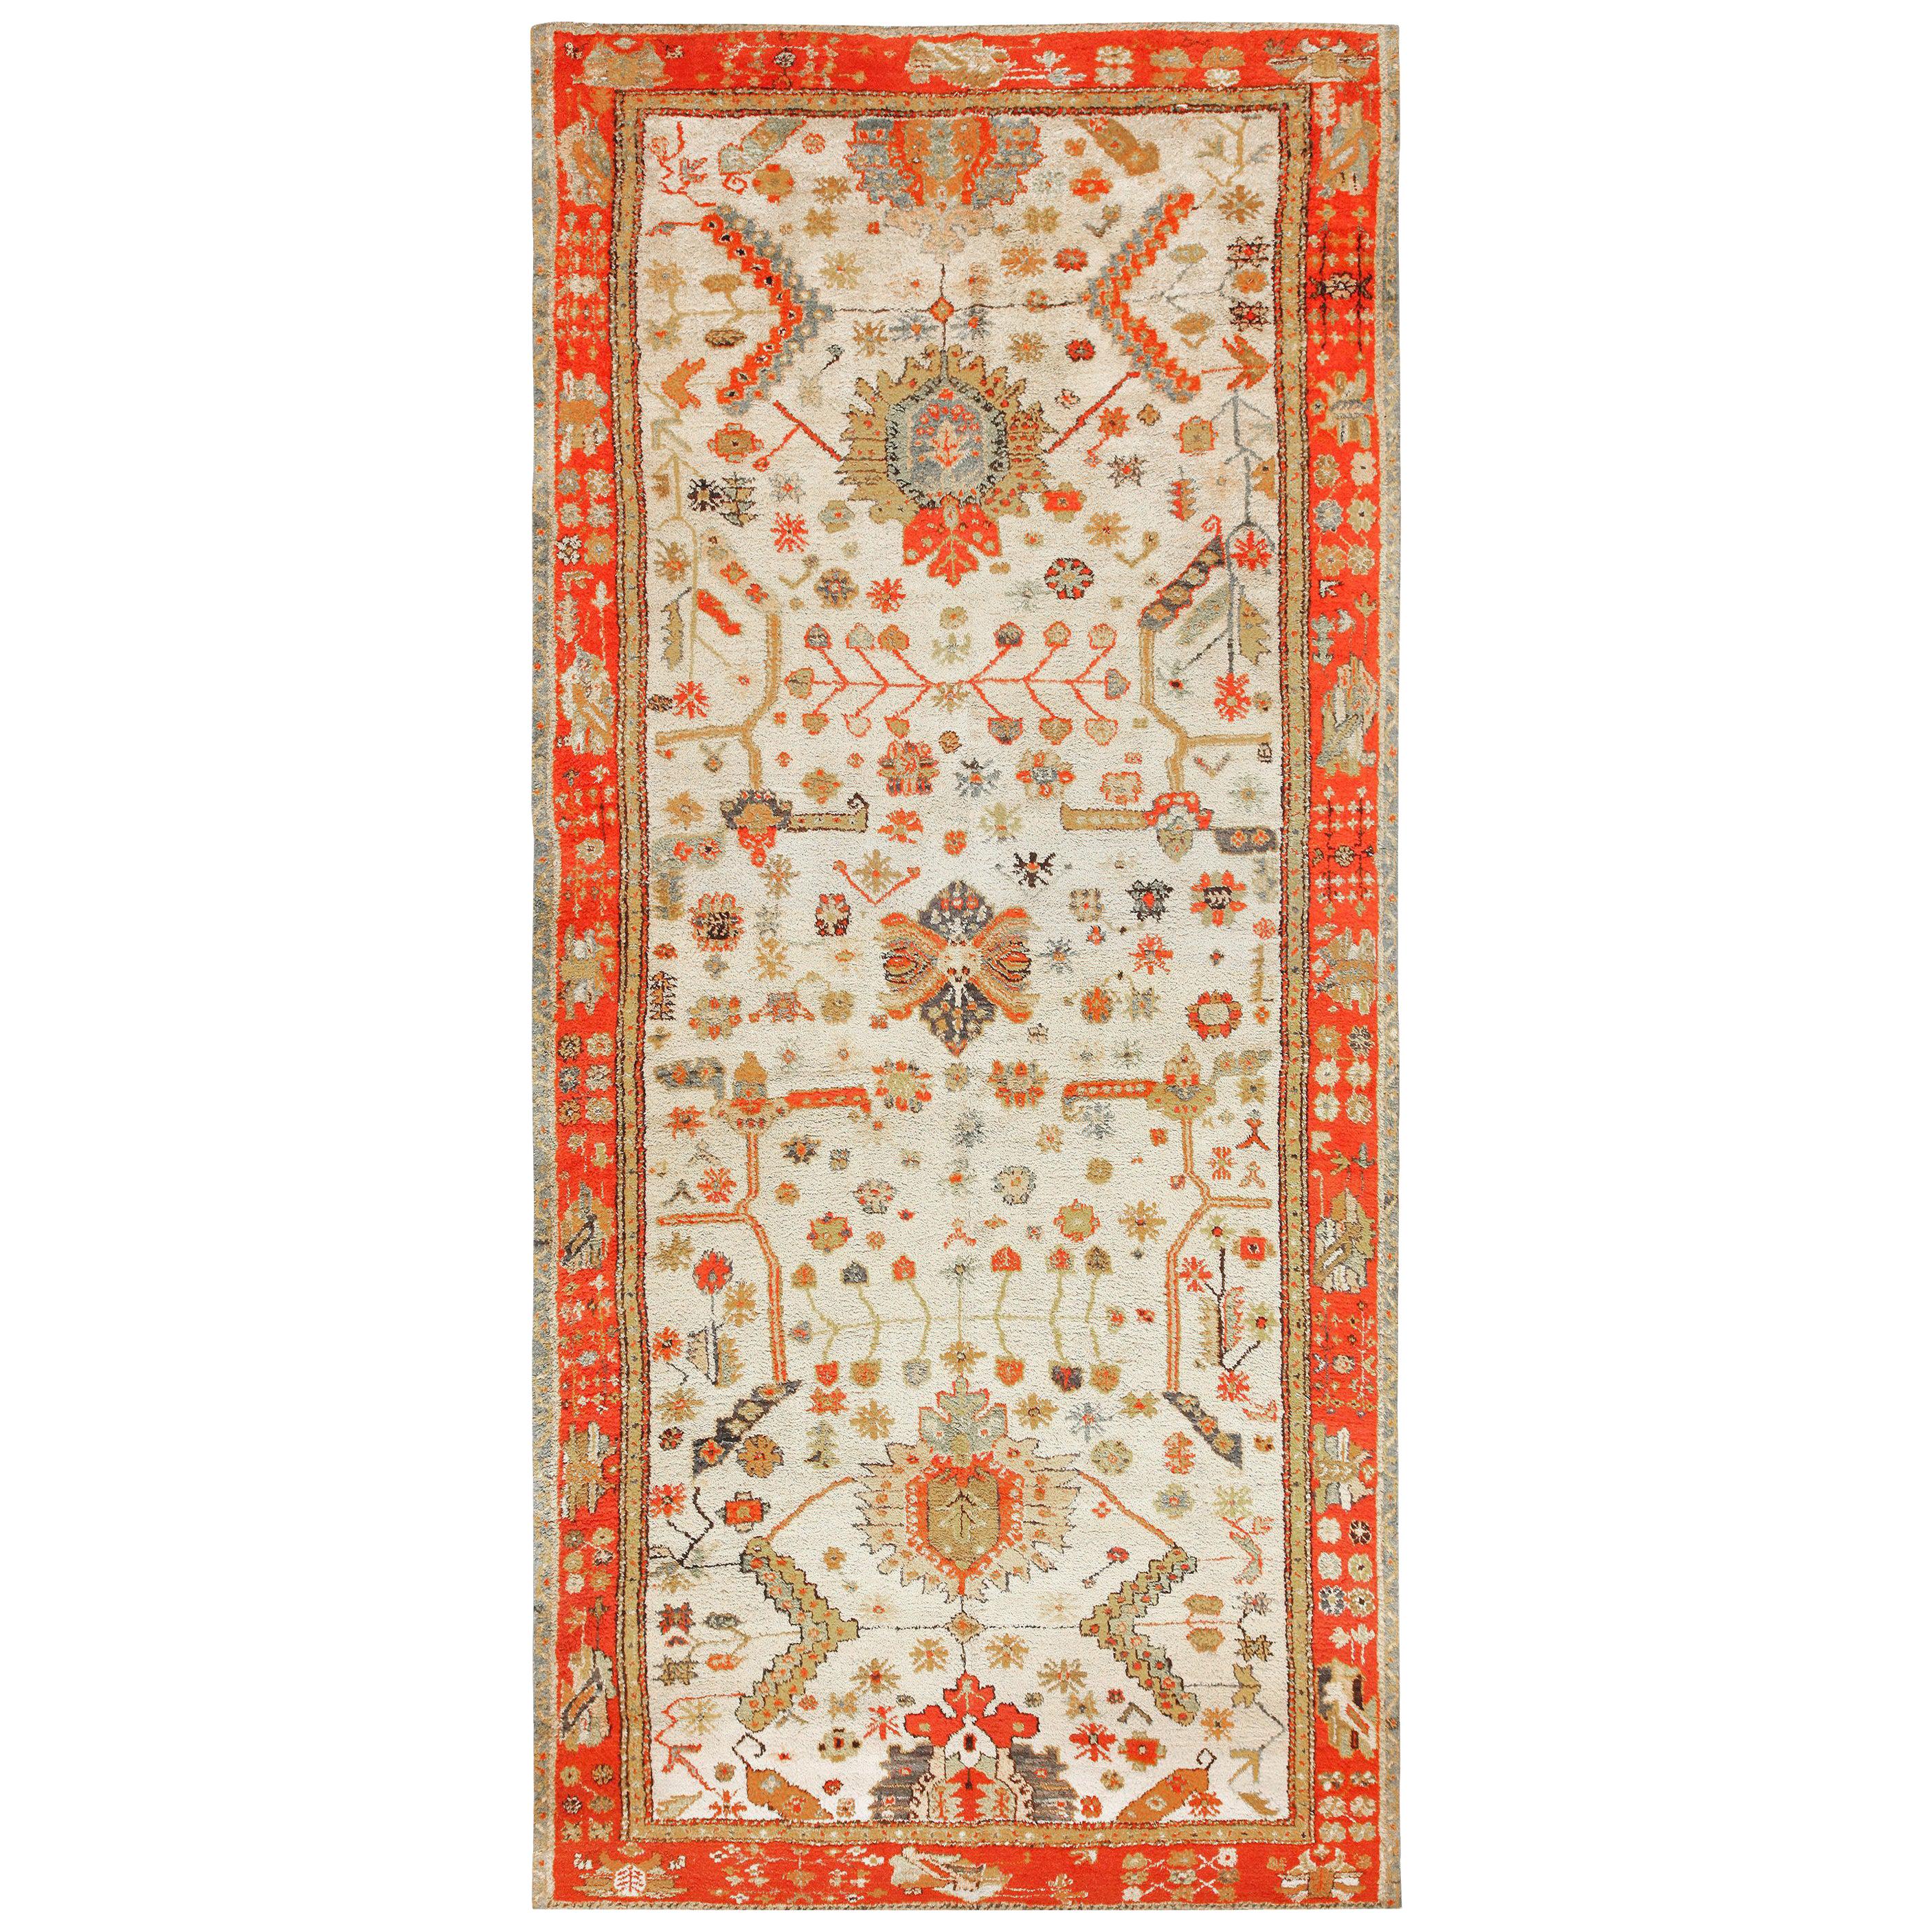 Antique Turkish Oushak Rug. Size: 8 ft 4 in x 17 ft 3 in 